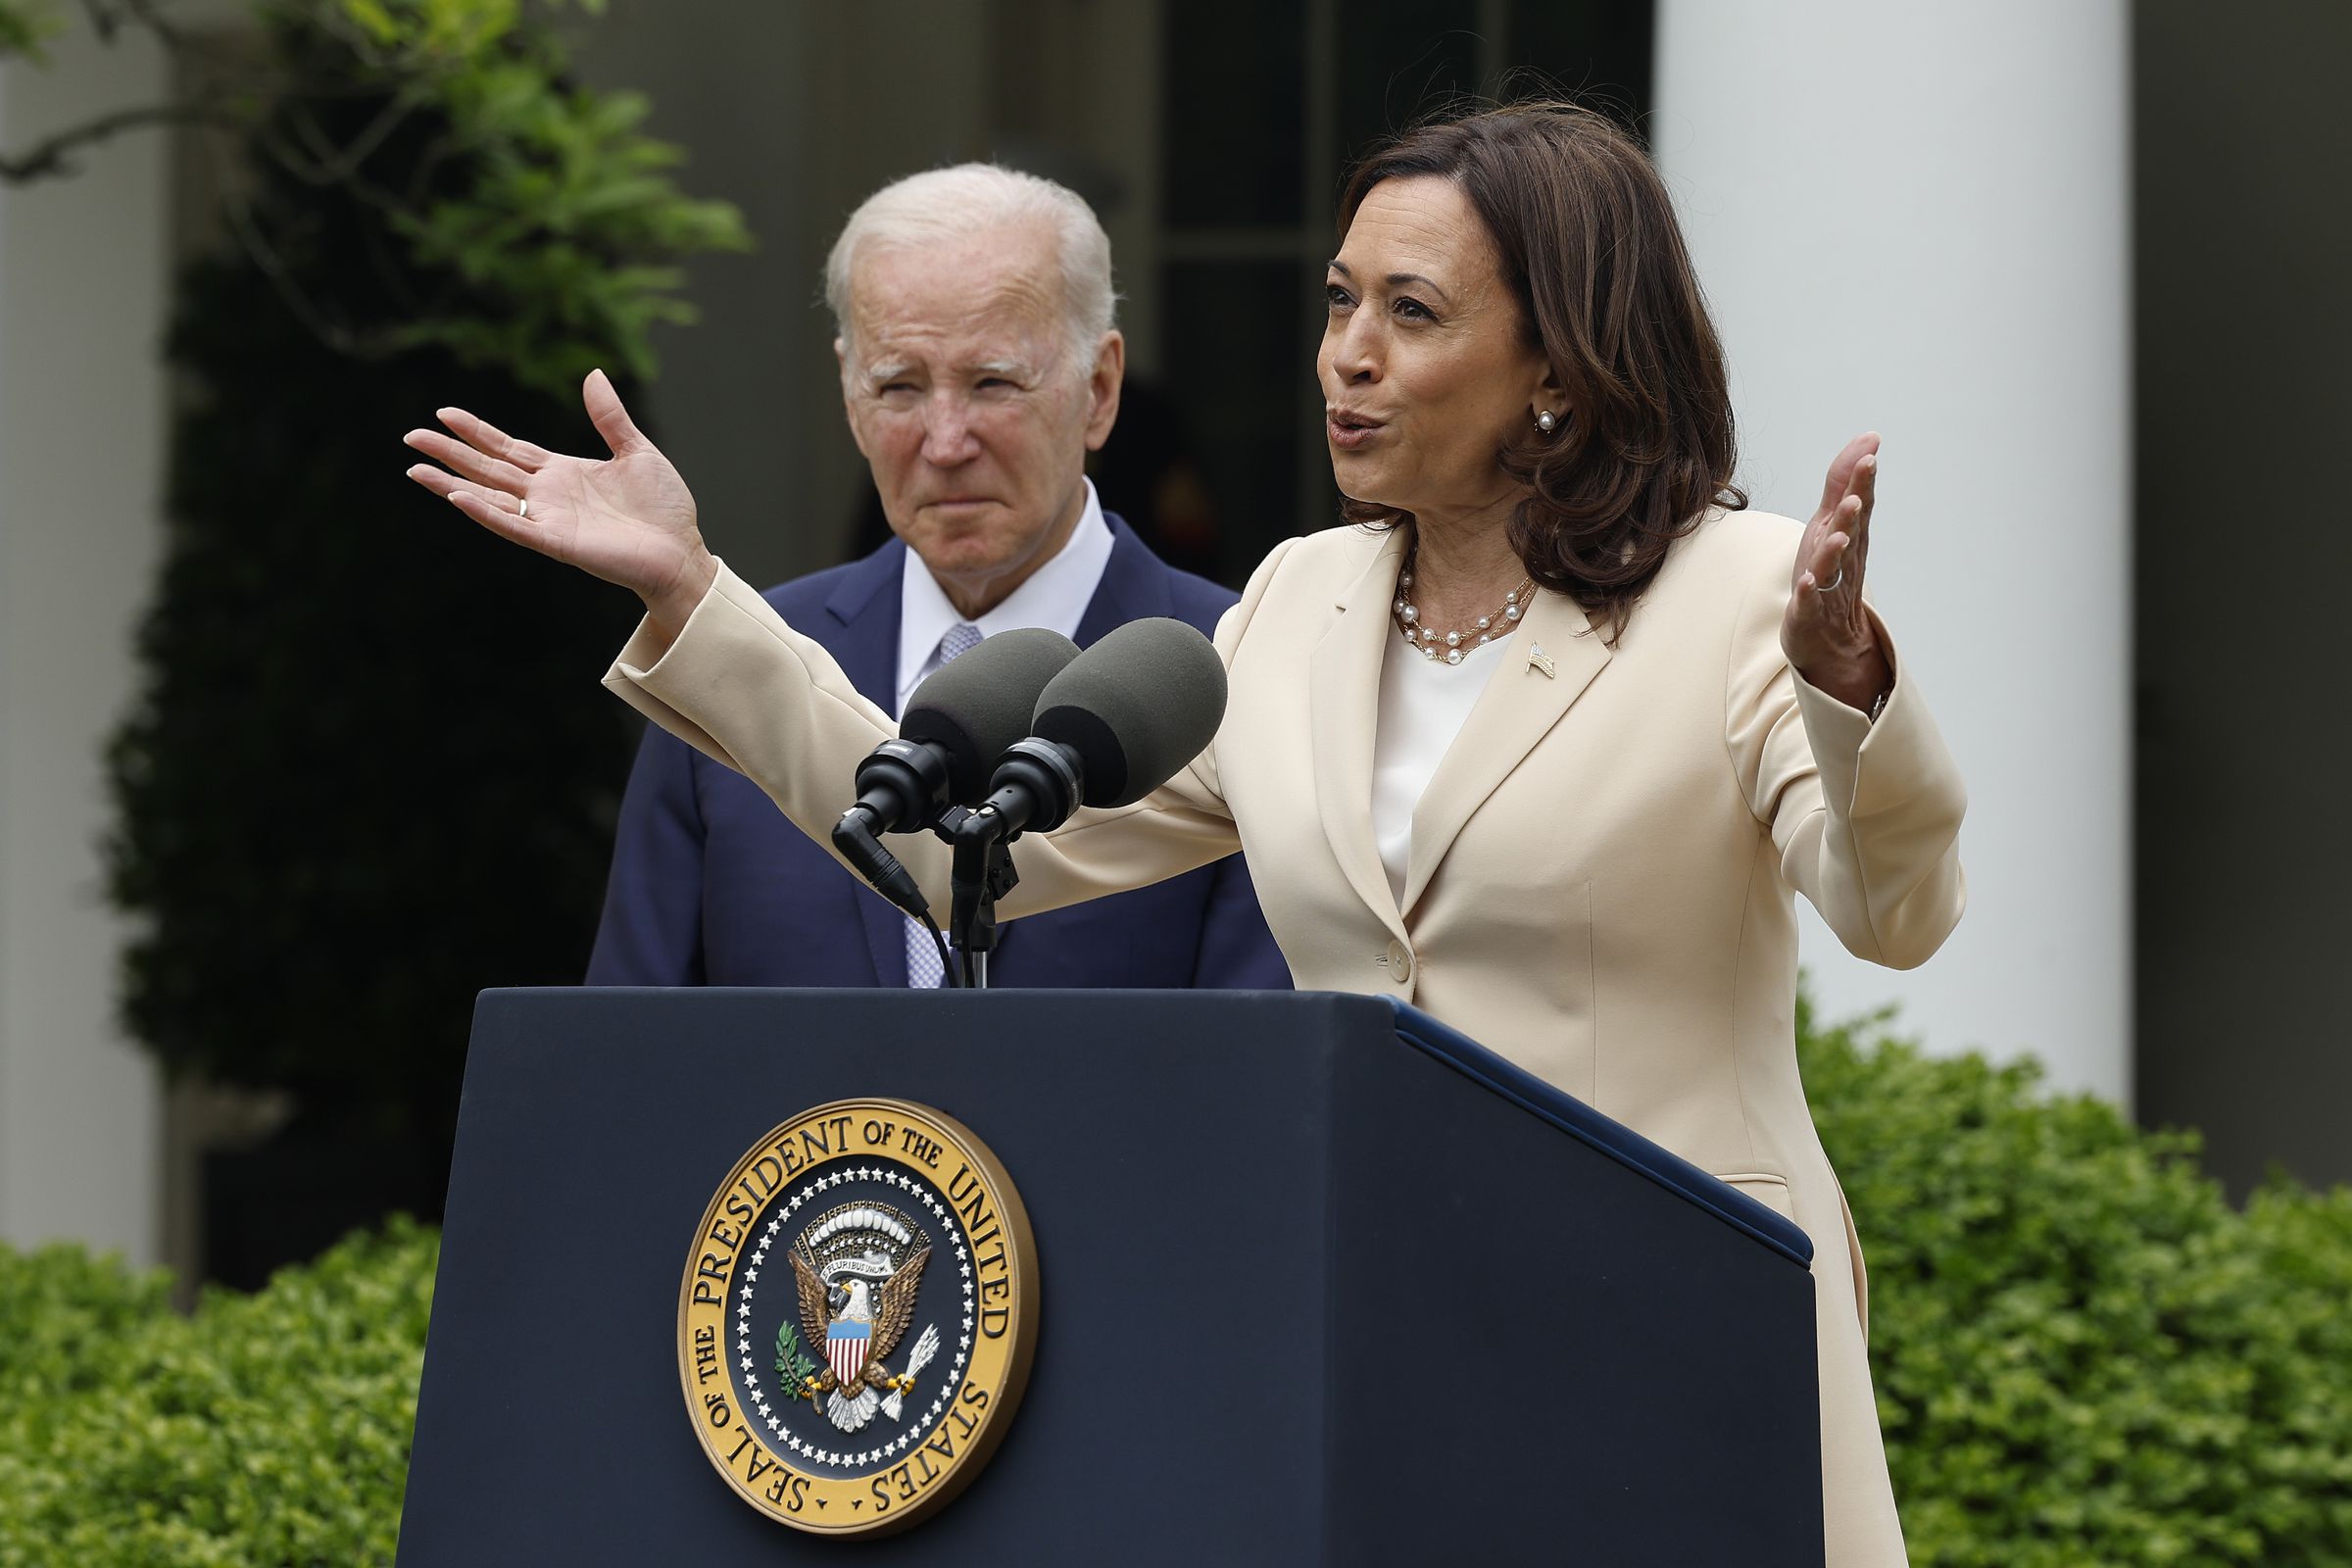 President Biden And VP Harris Deliver Remarks On National Small Business Week In The Rose Garden